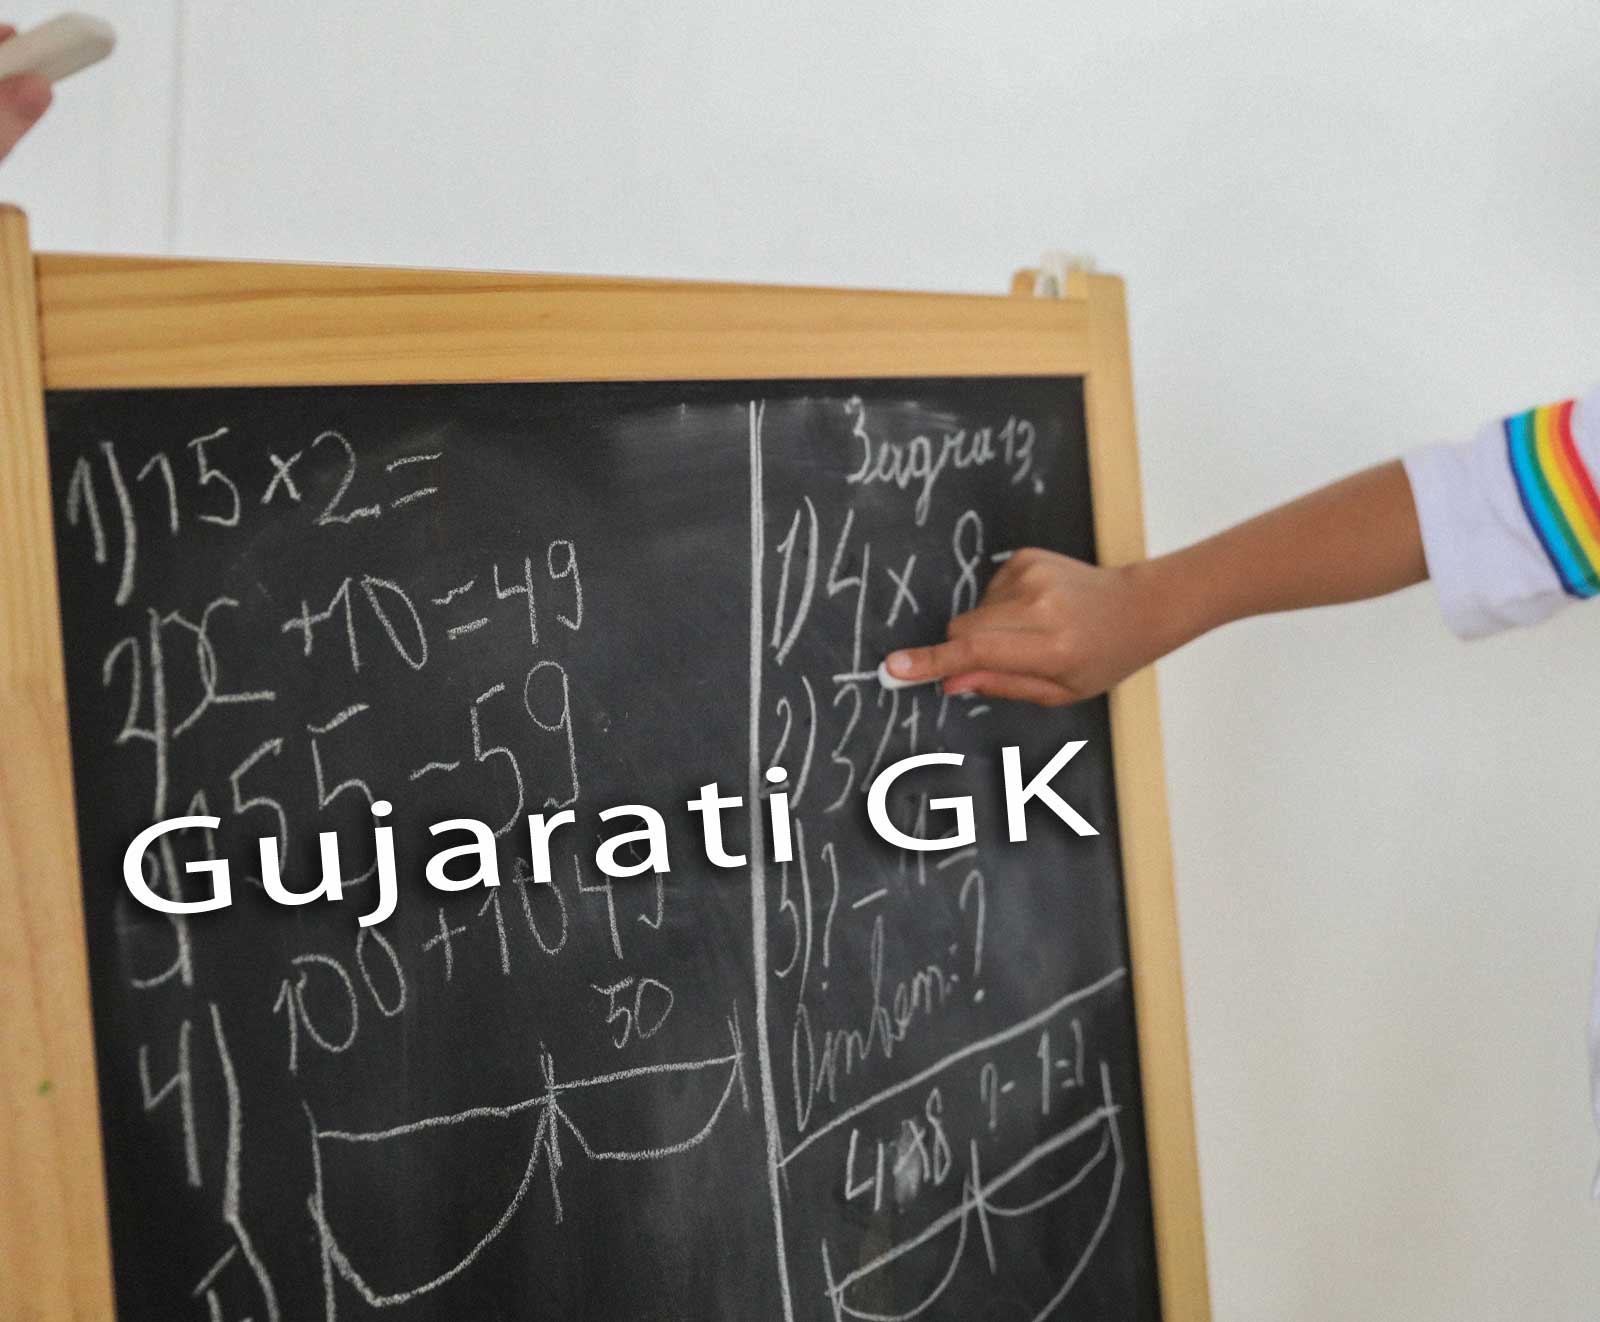 Gujarati GK Typical Questions and Answers